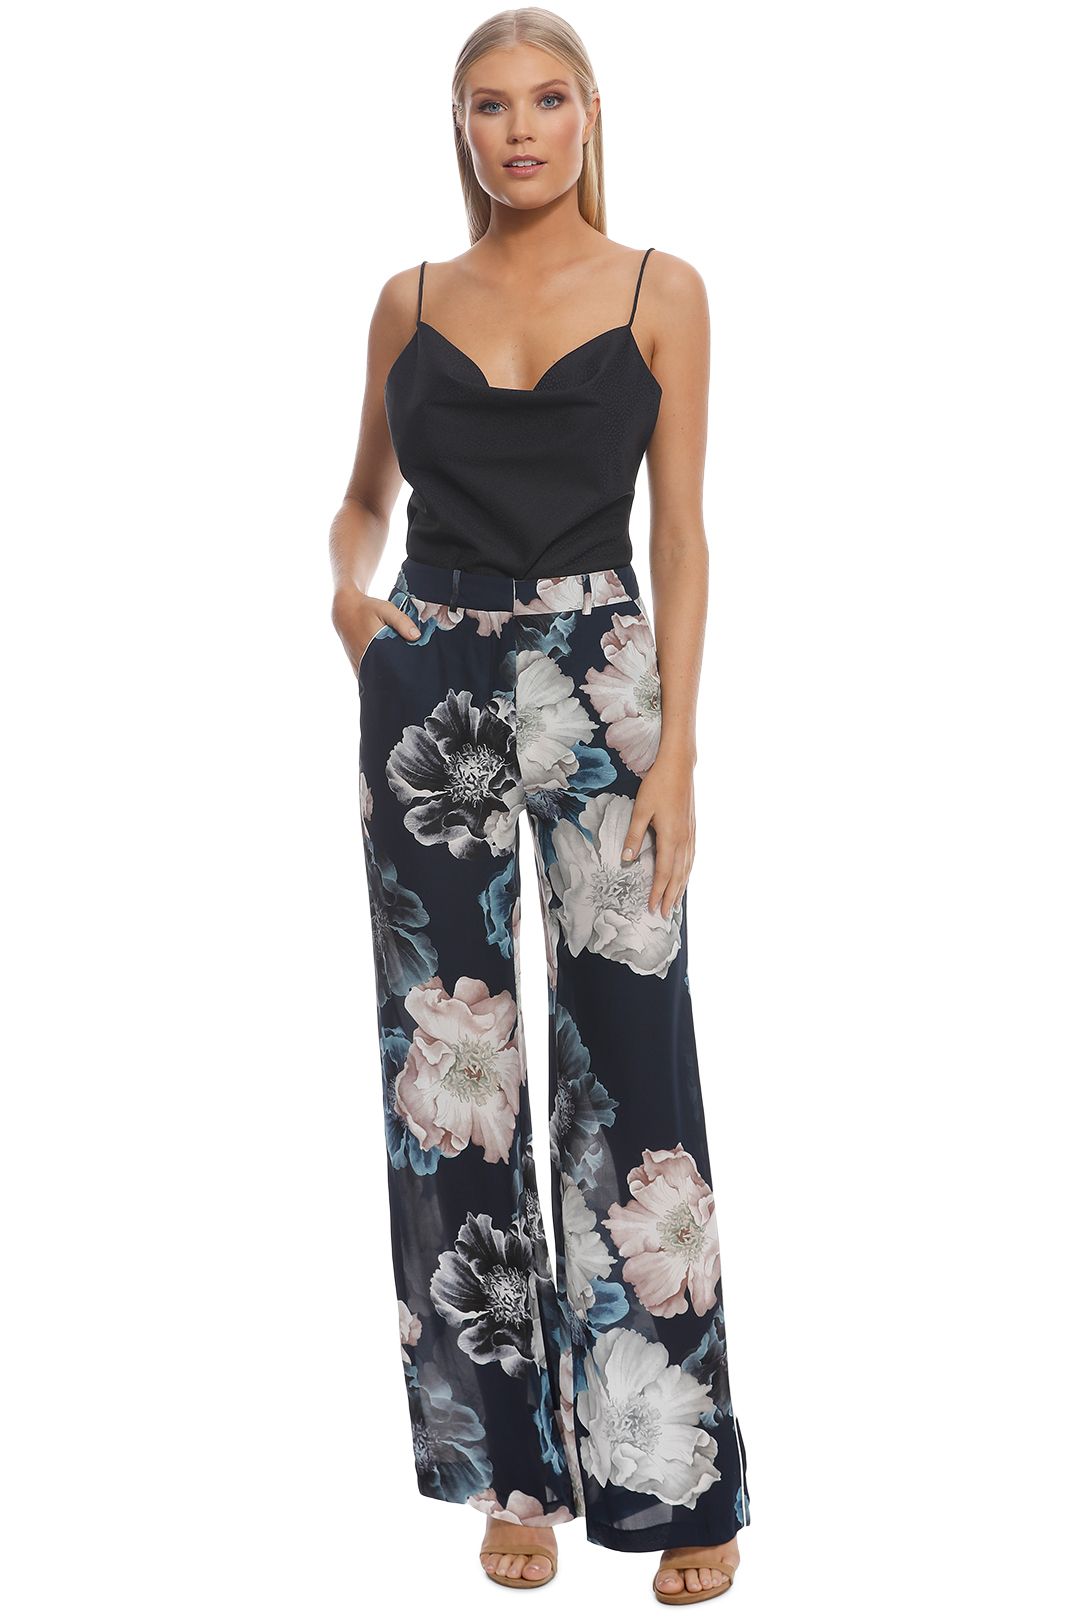 Nicholas The Label - Navy Floral Palazzo Pant - Navy - Front